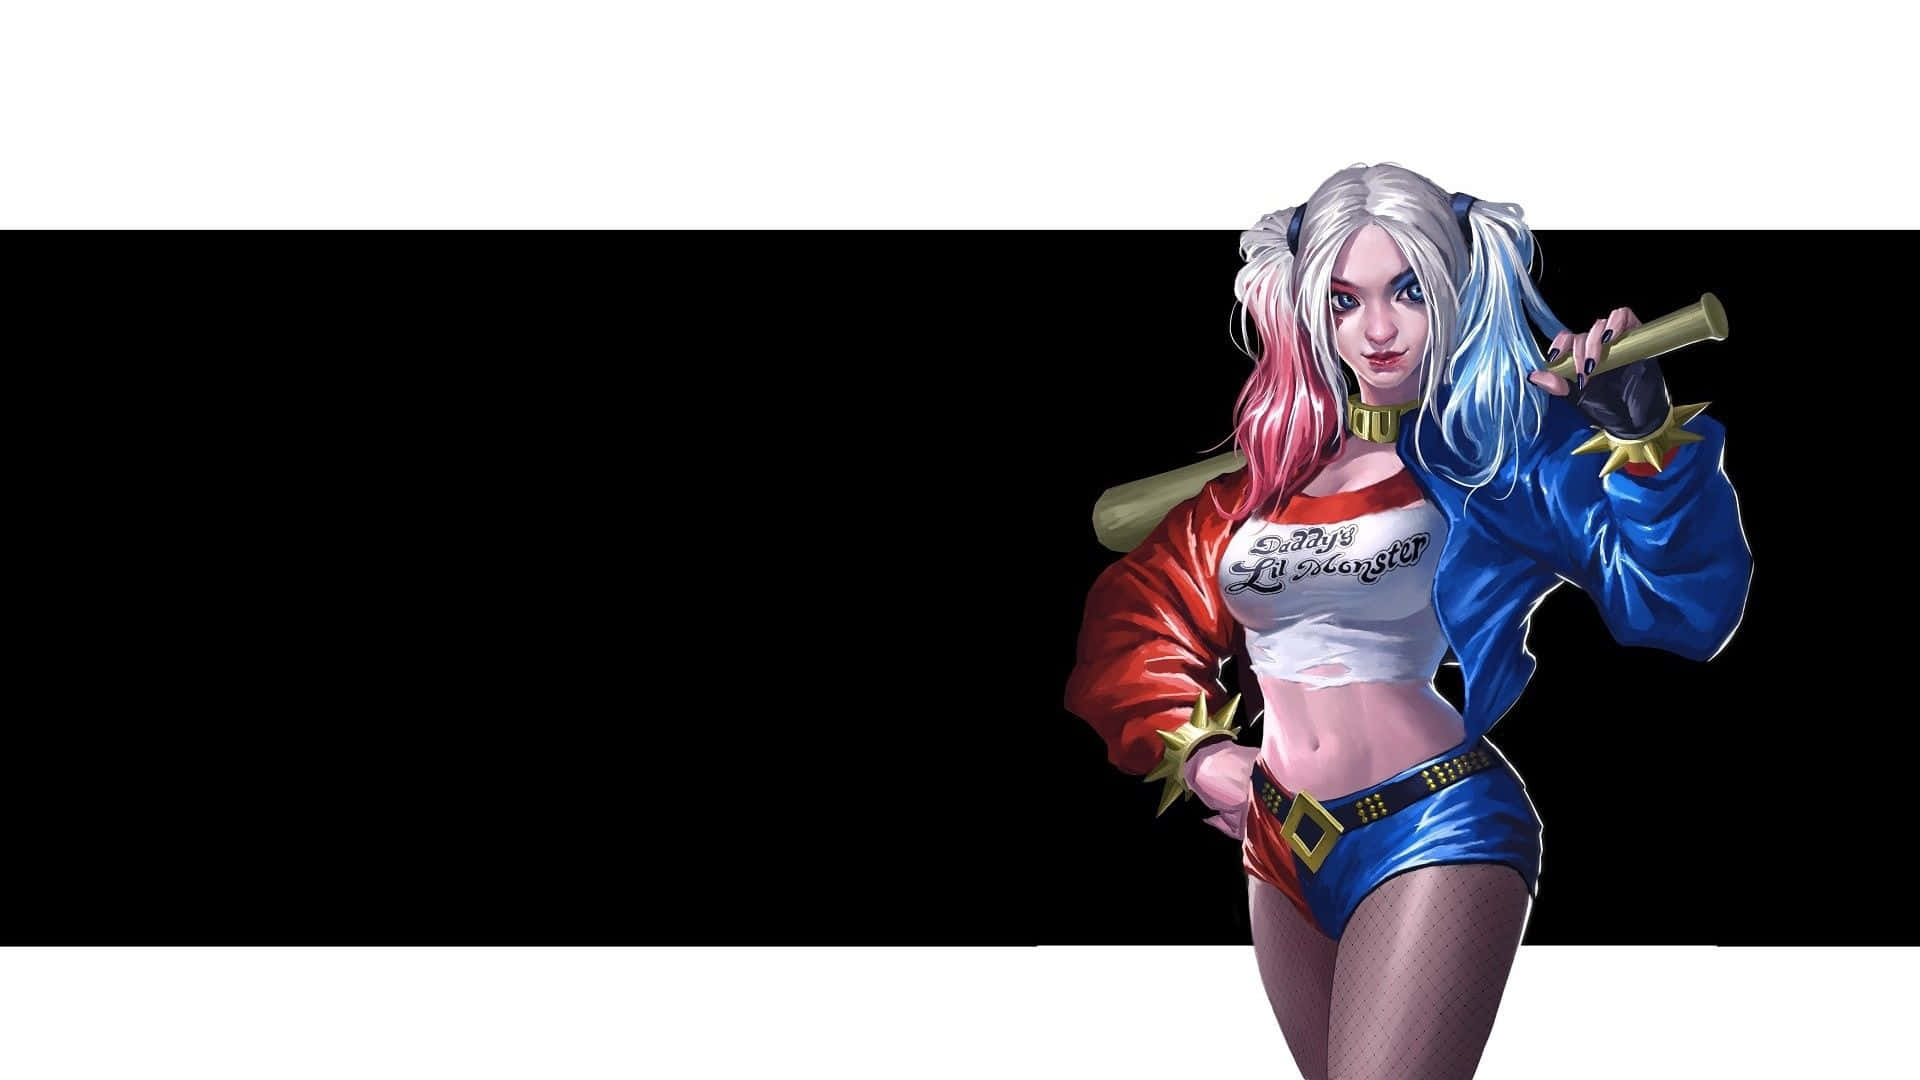 Harley Quinn in Action with her Signature Baseball Bat Wallpaper